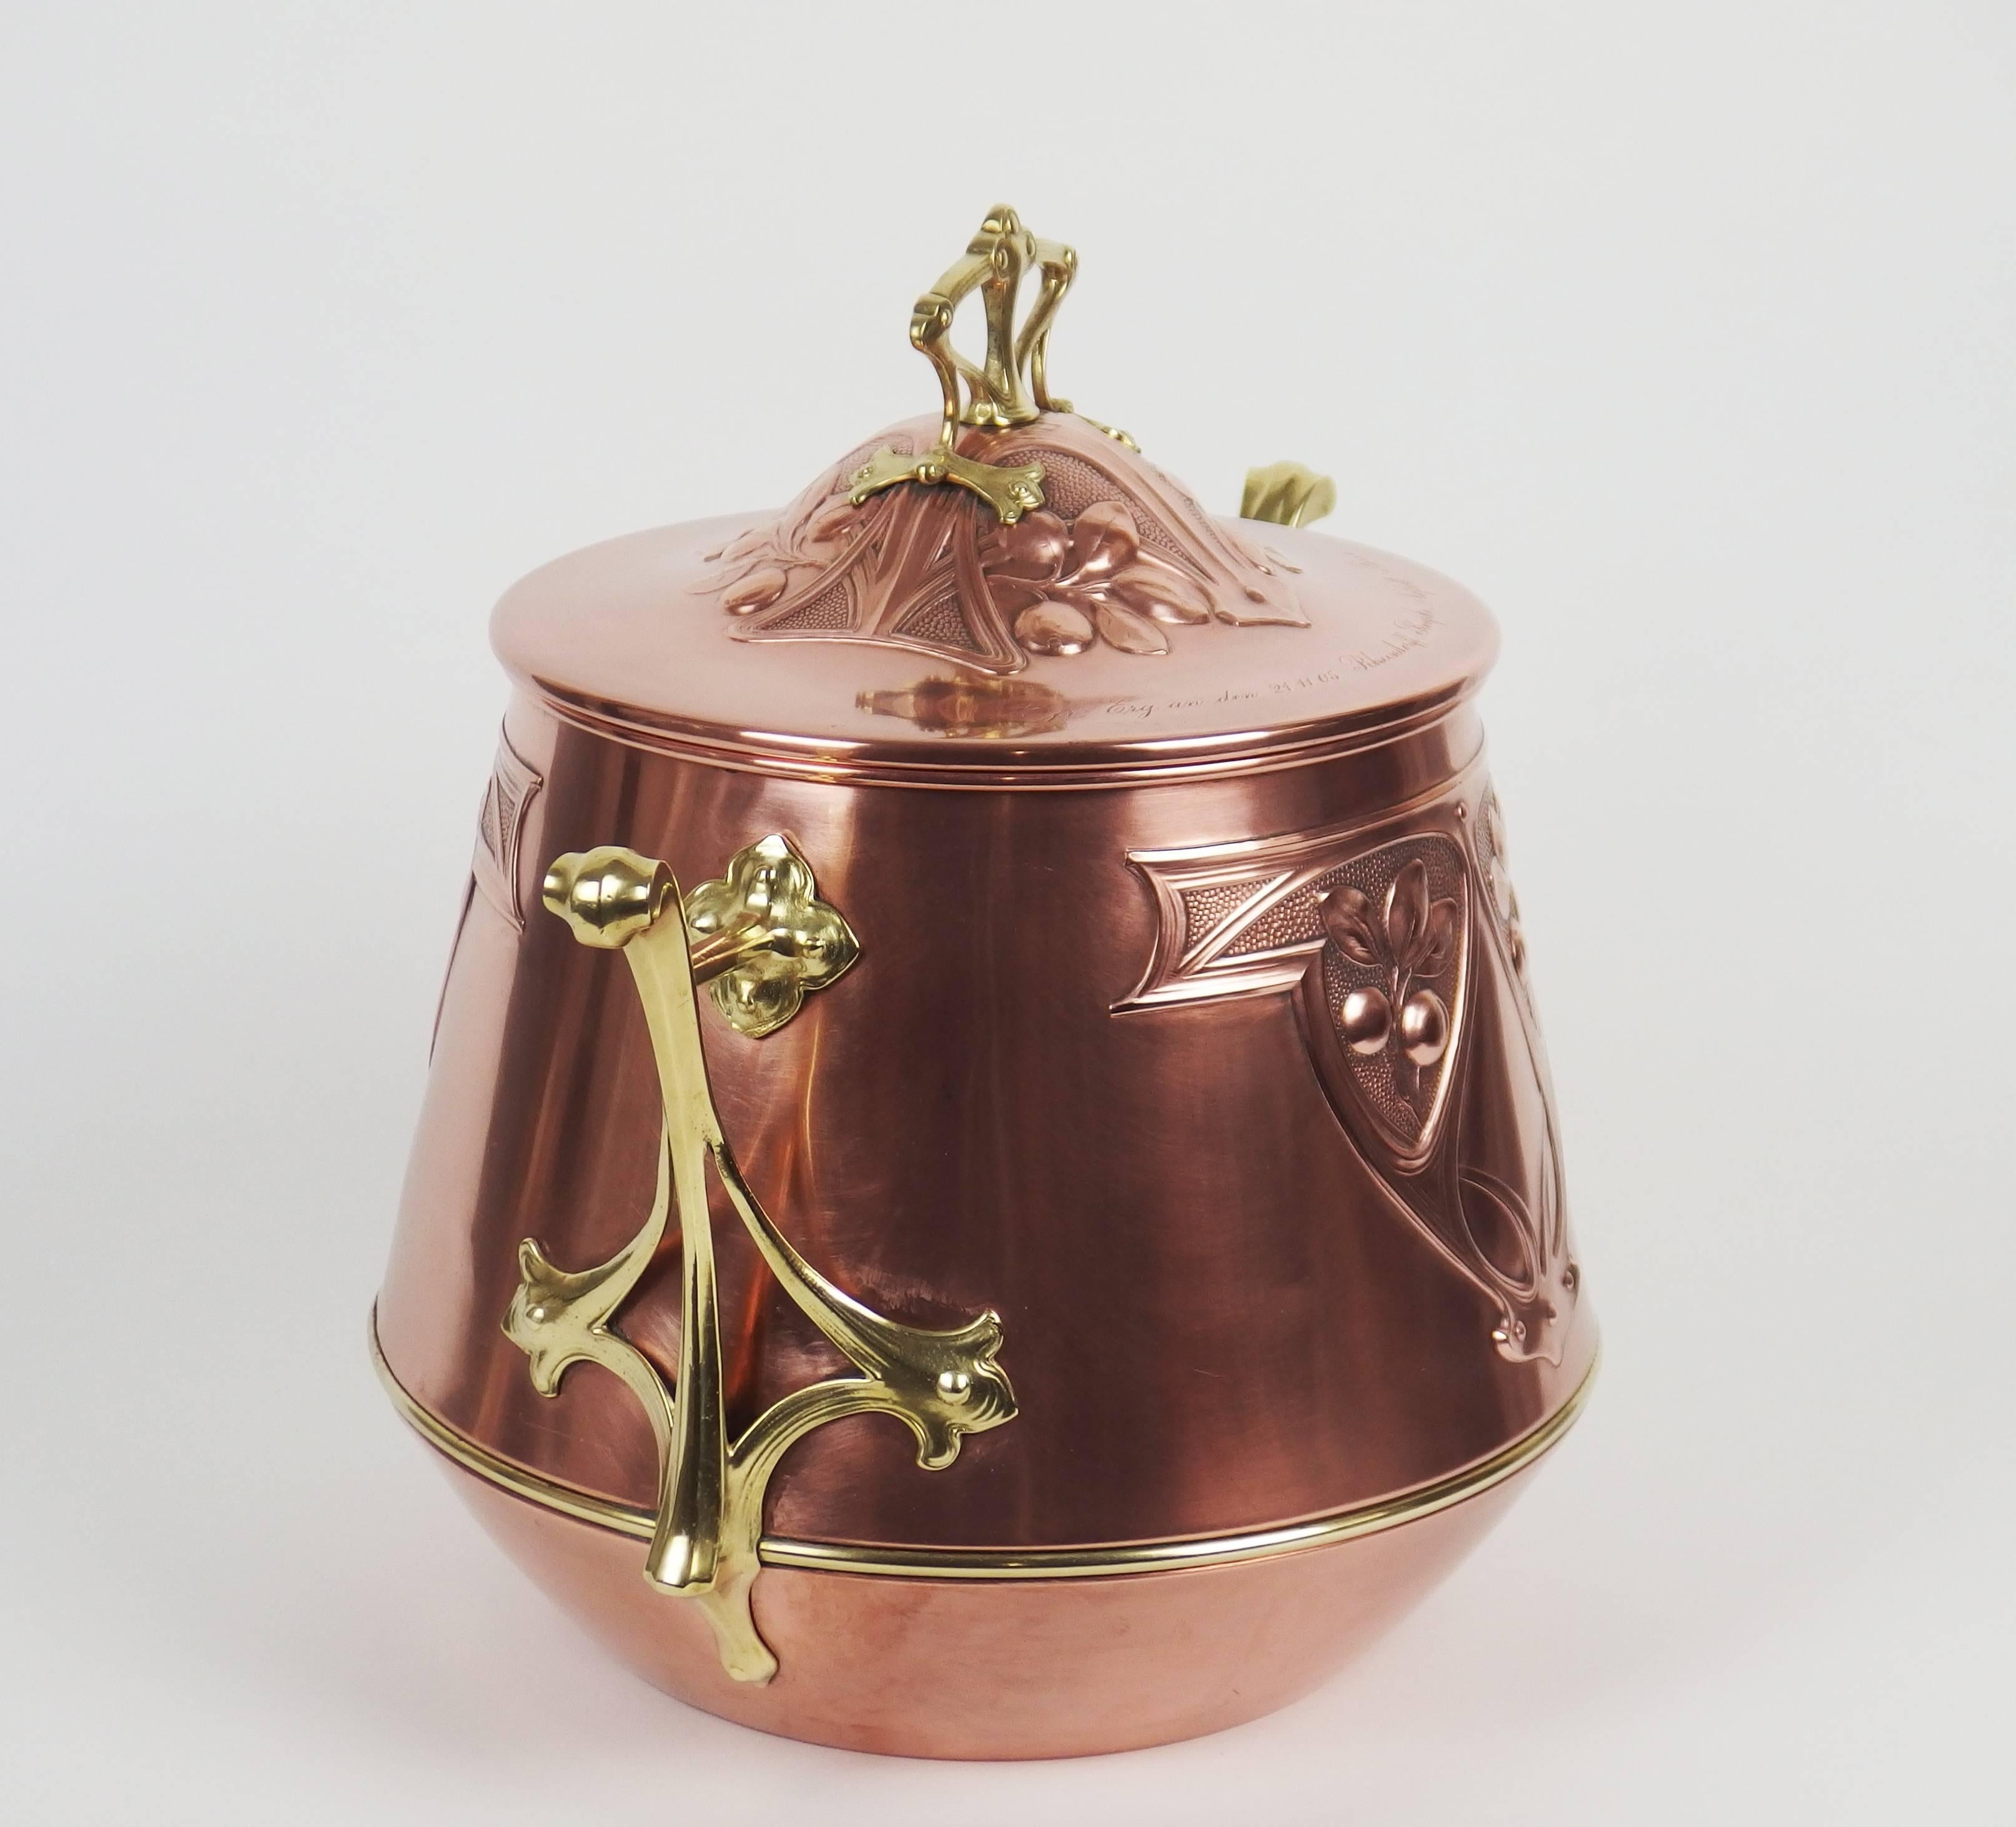 A brass and copper covered pot with flowers patterns and memorial inscriptions on the lid: